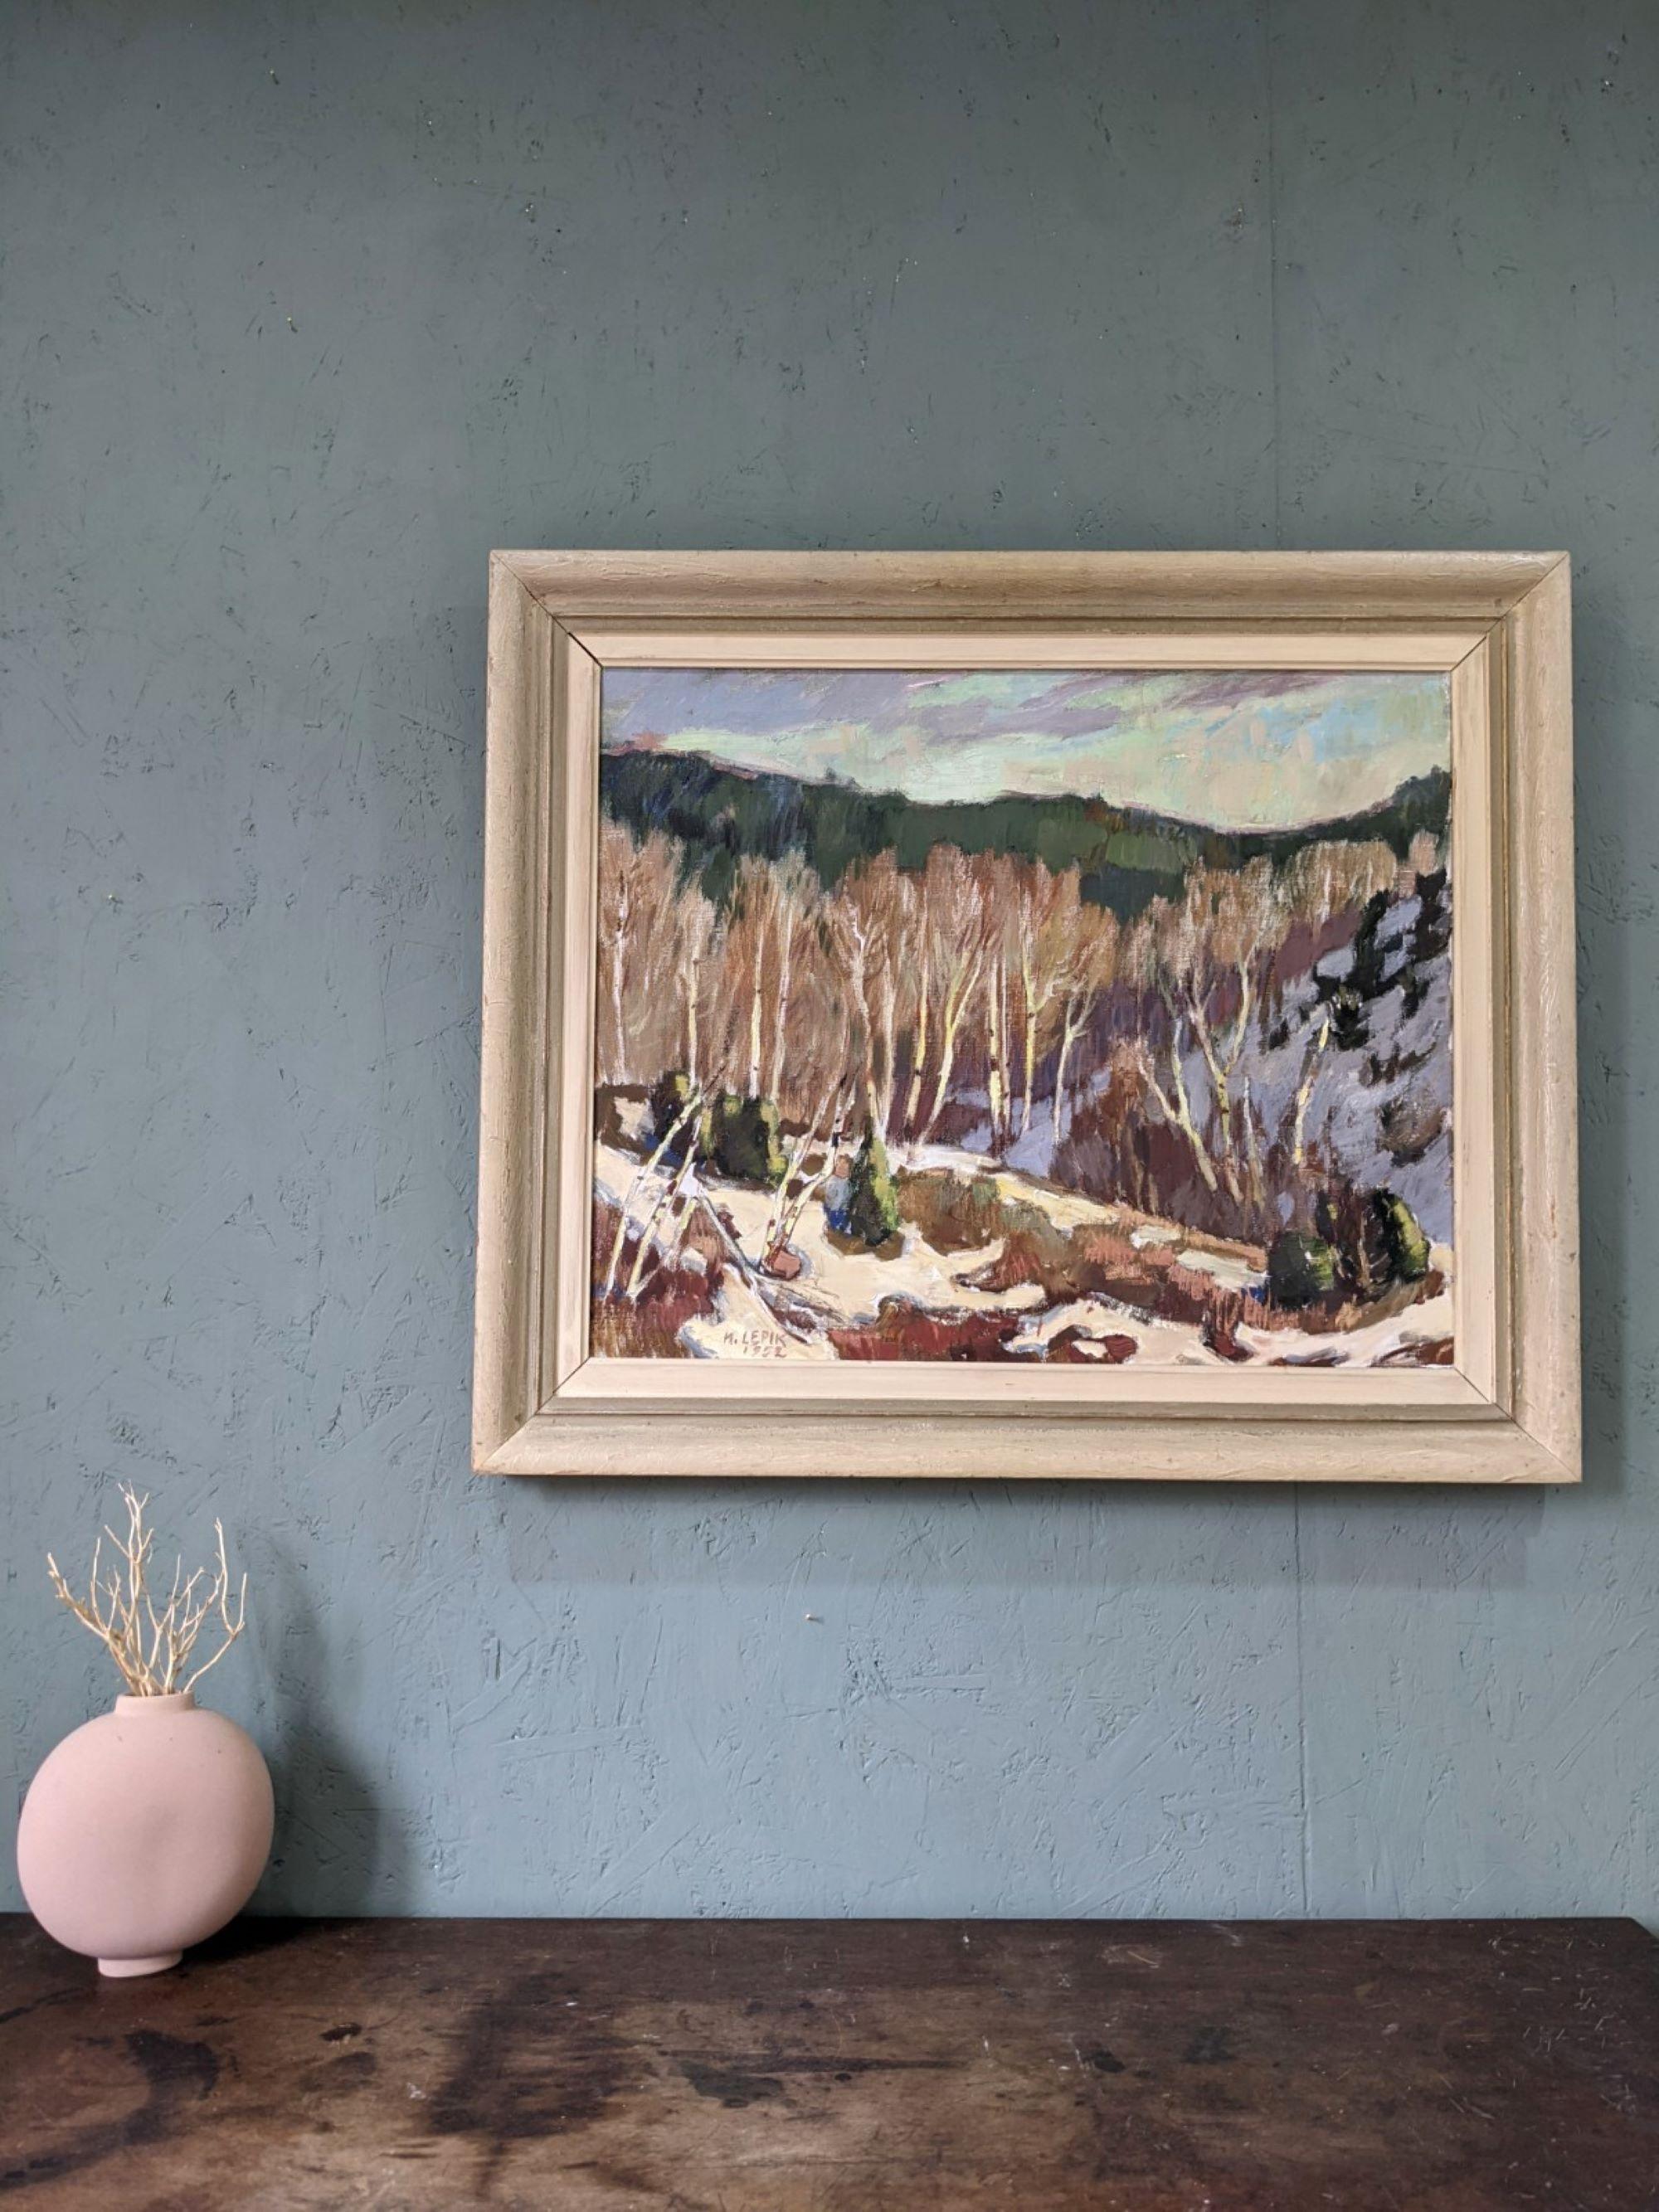 ALP TREES
Size: 64 x 74.5 cm (including frame)
Oil on canvas

A vibrant modernist style nature landscape composition, executed in oil onto canvas and painted in 1952.

Featuring a rich and vivid colour palette in earthy tones, this snow-filled alp